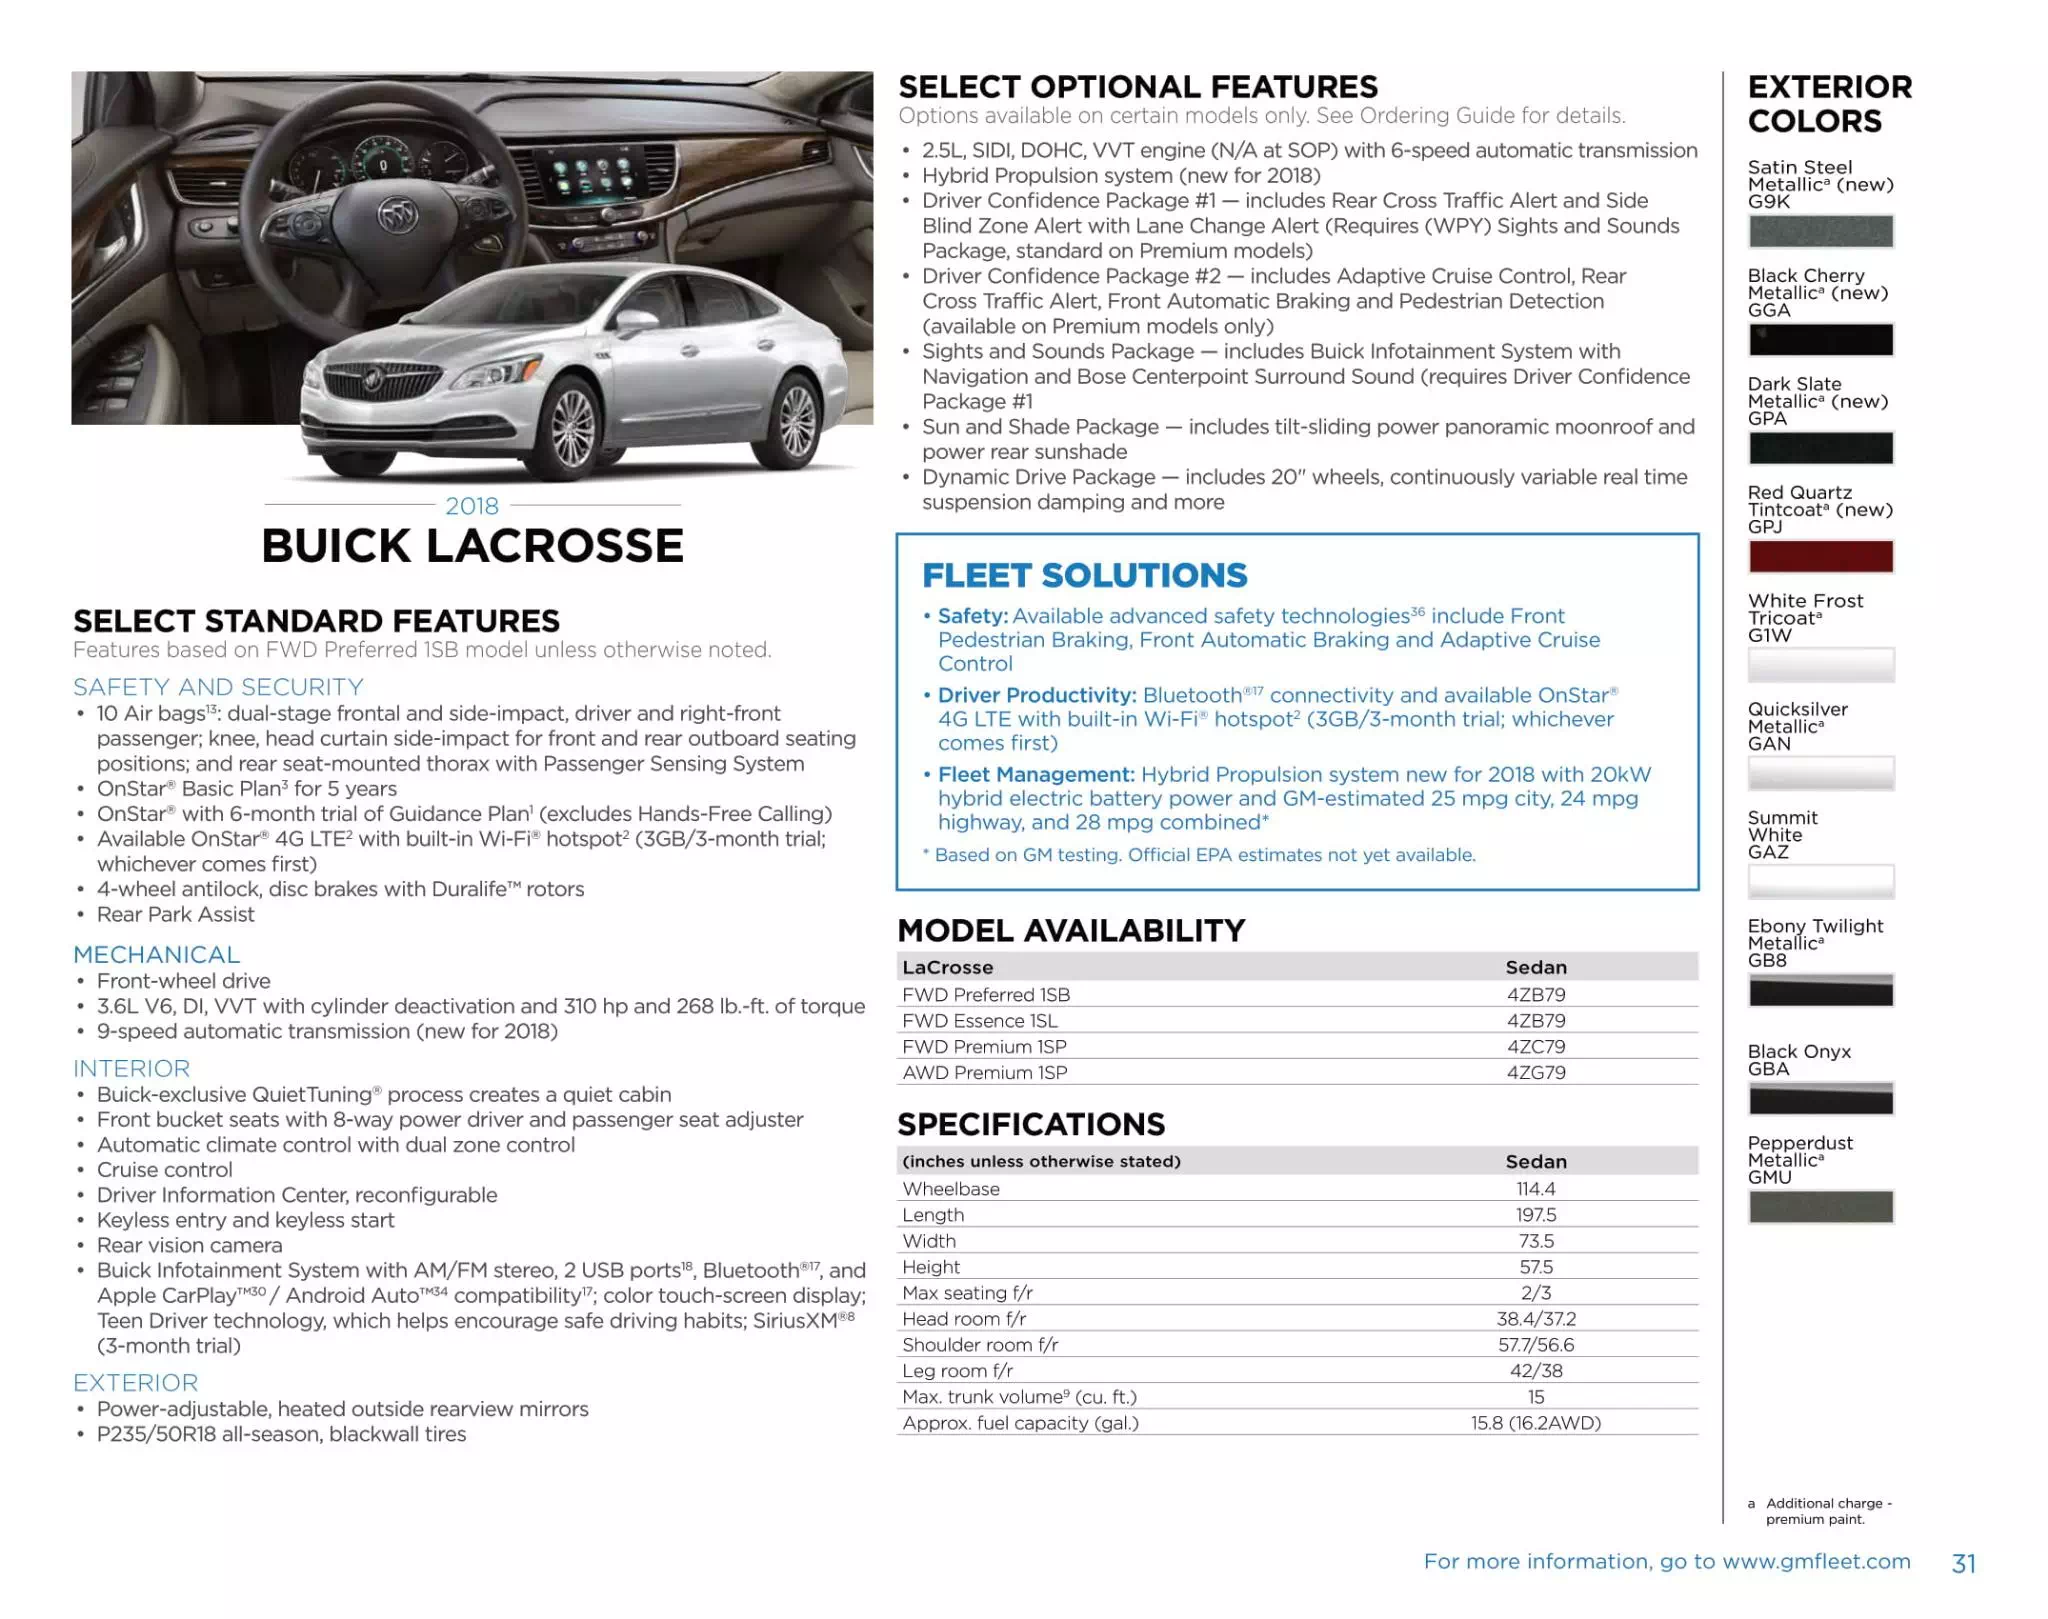 General Motors Sell sheet for Buick Lacrosse Models, and Color Codes in 2018